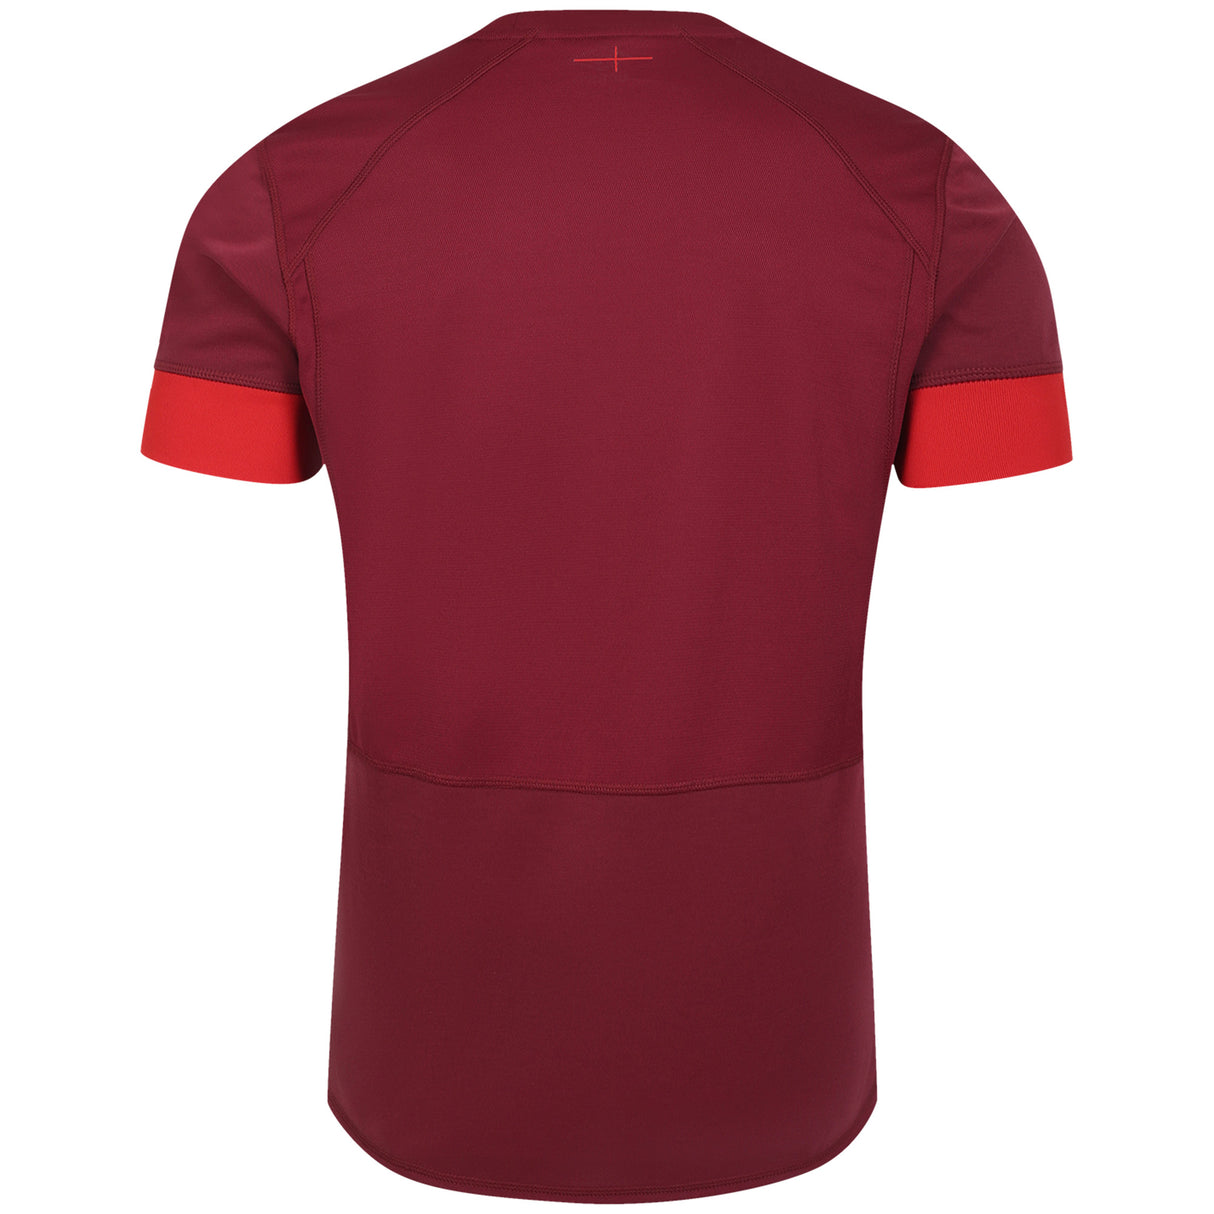 England Rugby Relaxed Fit Training Jersey - Red - Mens - Kit Captain